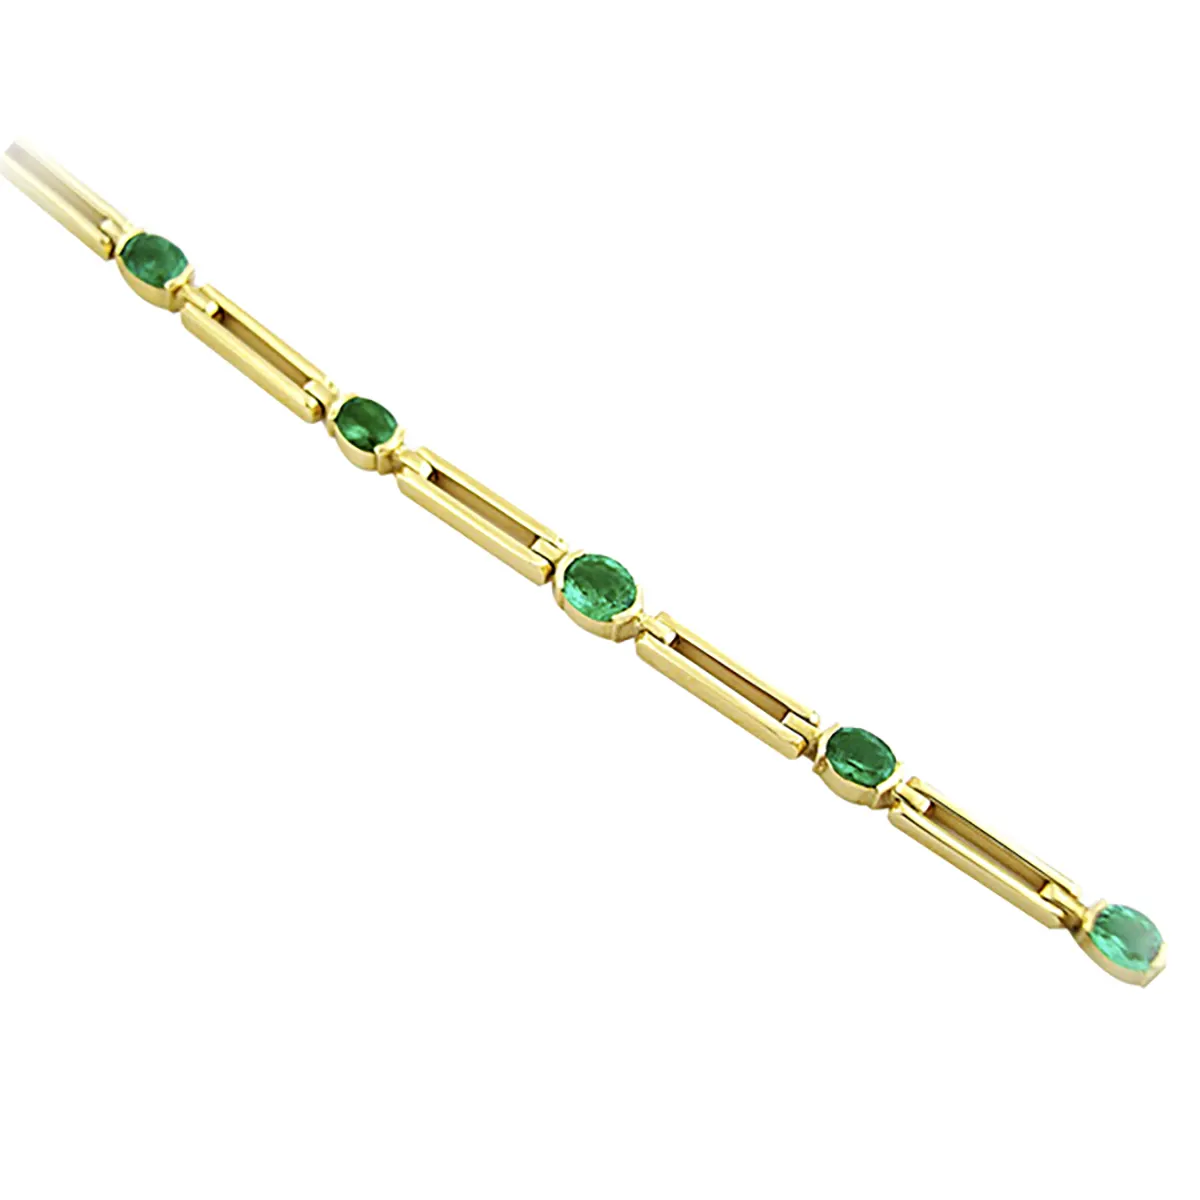 Emerald Bracelet in 18K Yellow Gold With 9 Oval Shape Natural Emeralds